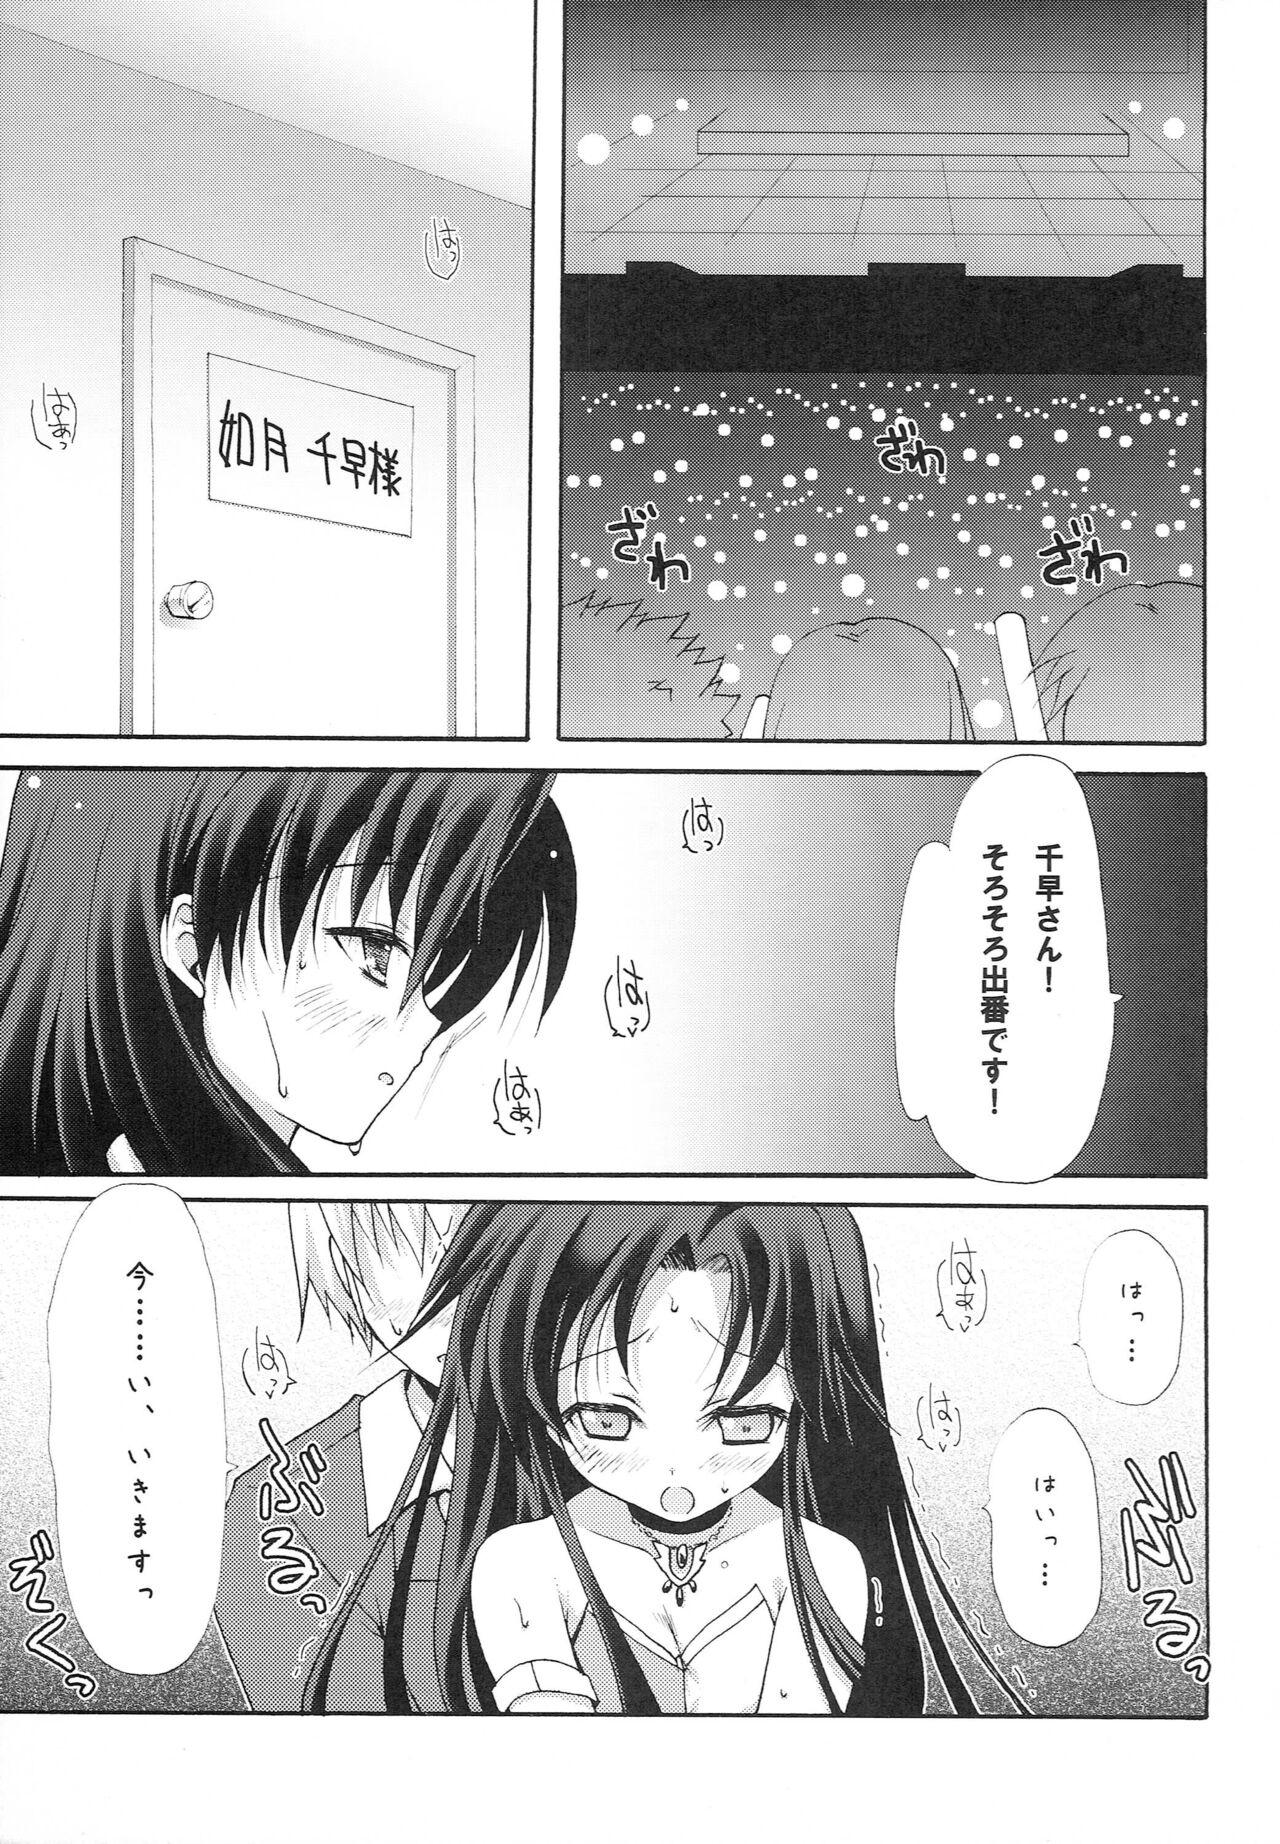 Mofos 1000th ENCORE - The idolmaster Humiliation - Page 8